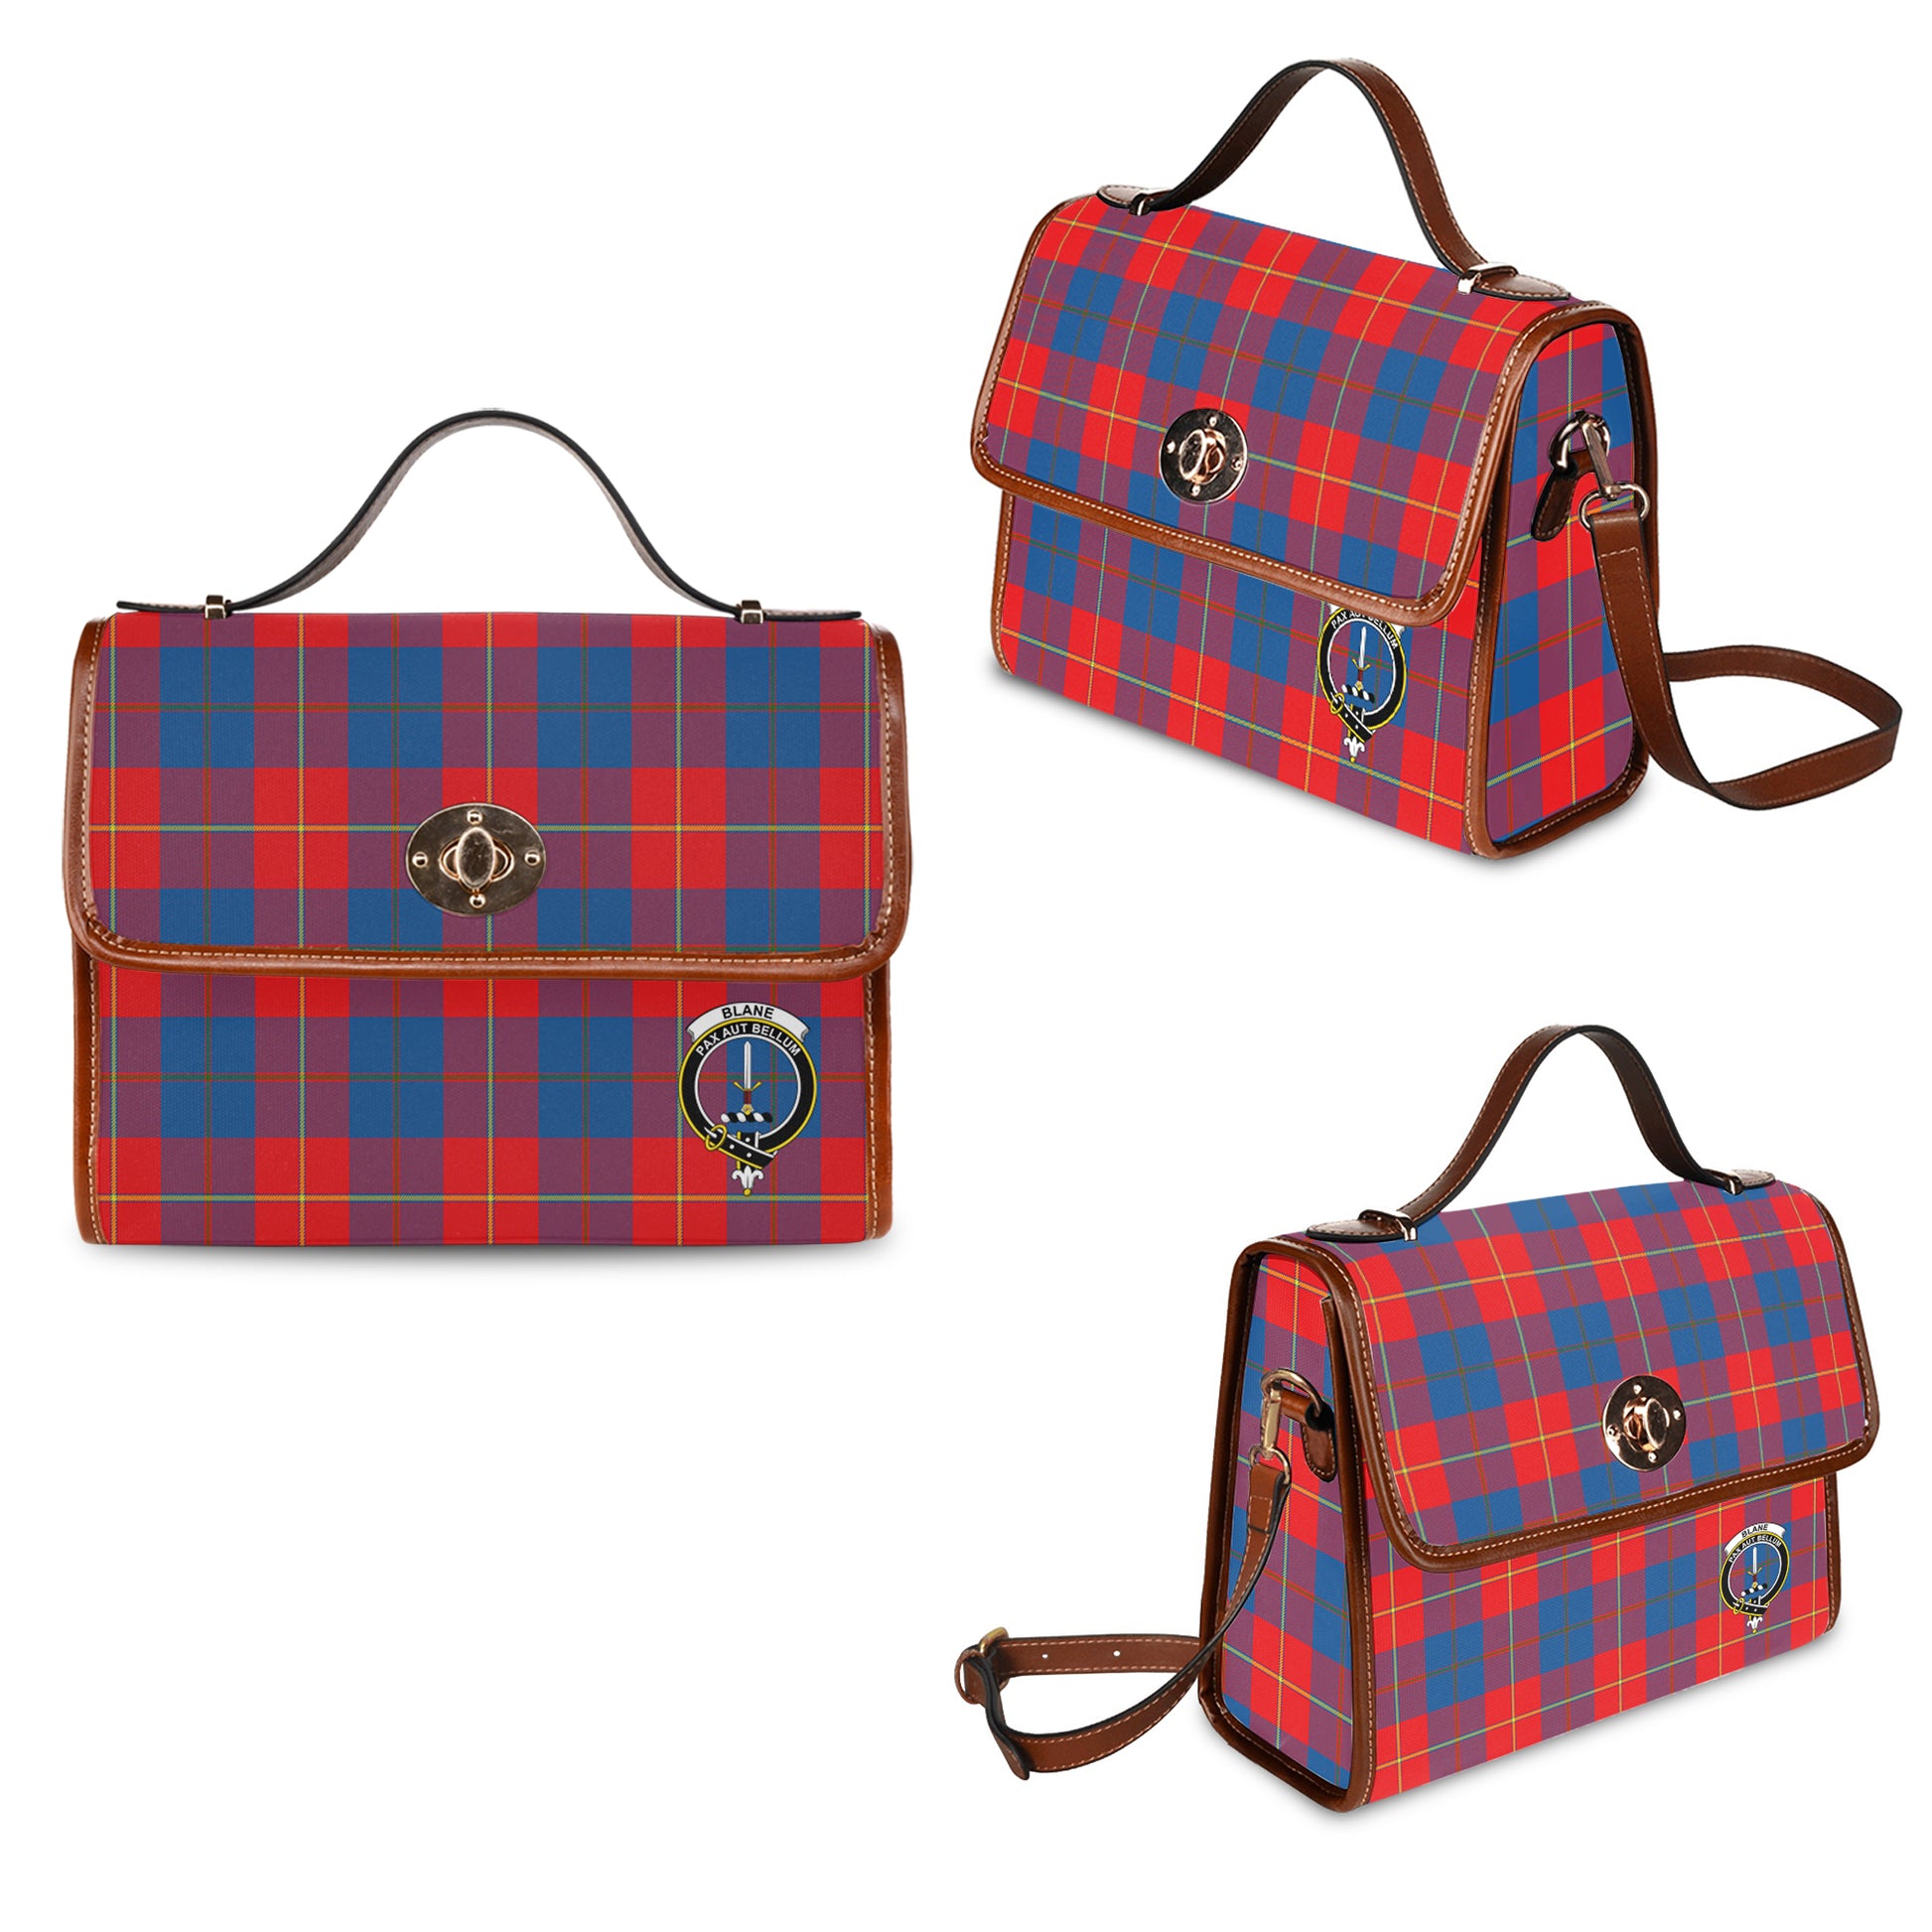 Blane Tartan Leather Strap Waterproof Canvas Bag with Family Crest One Size 34cm * 42cm (13.4" x 16.5") - Tartanvibesclothing